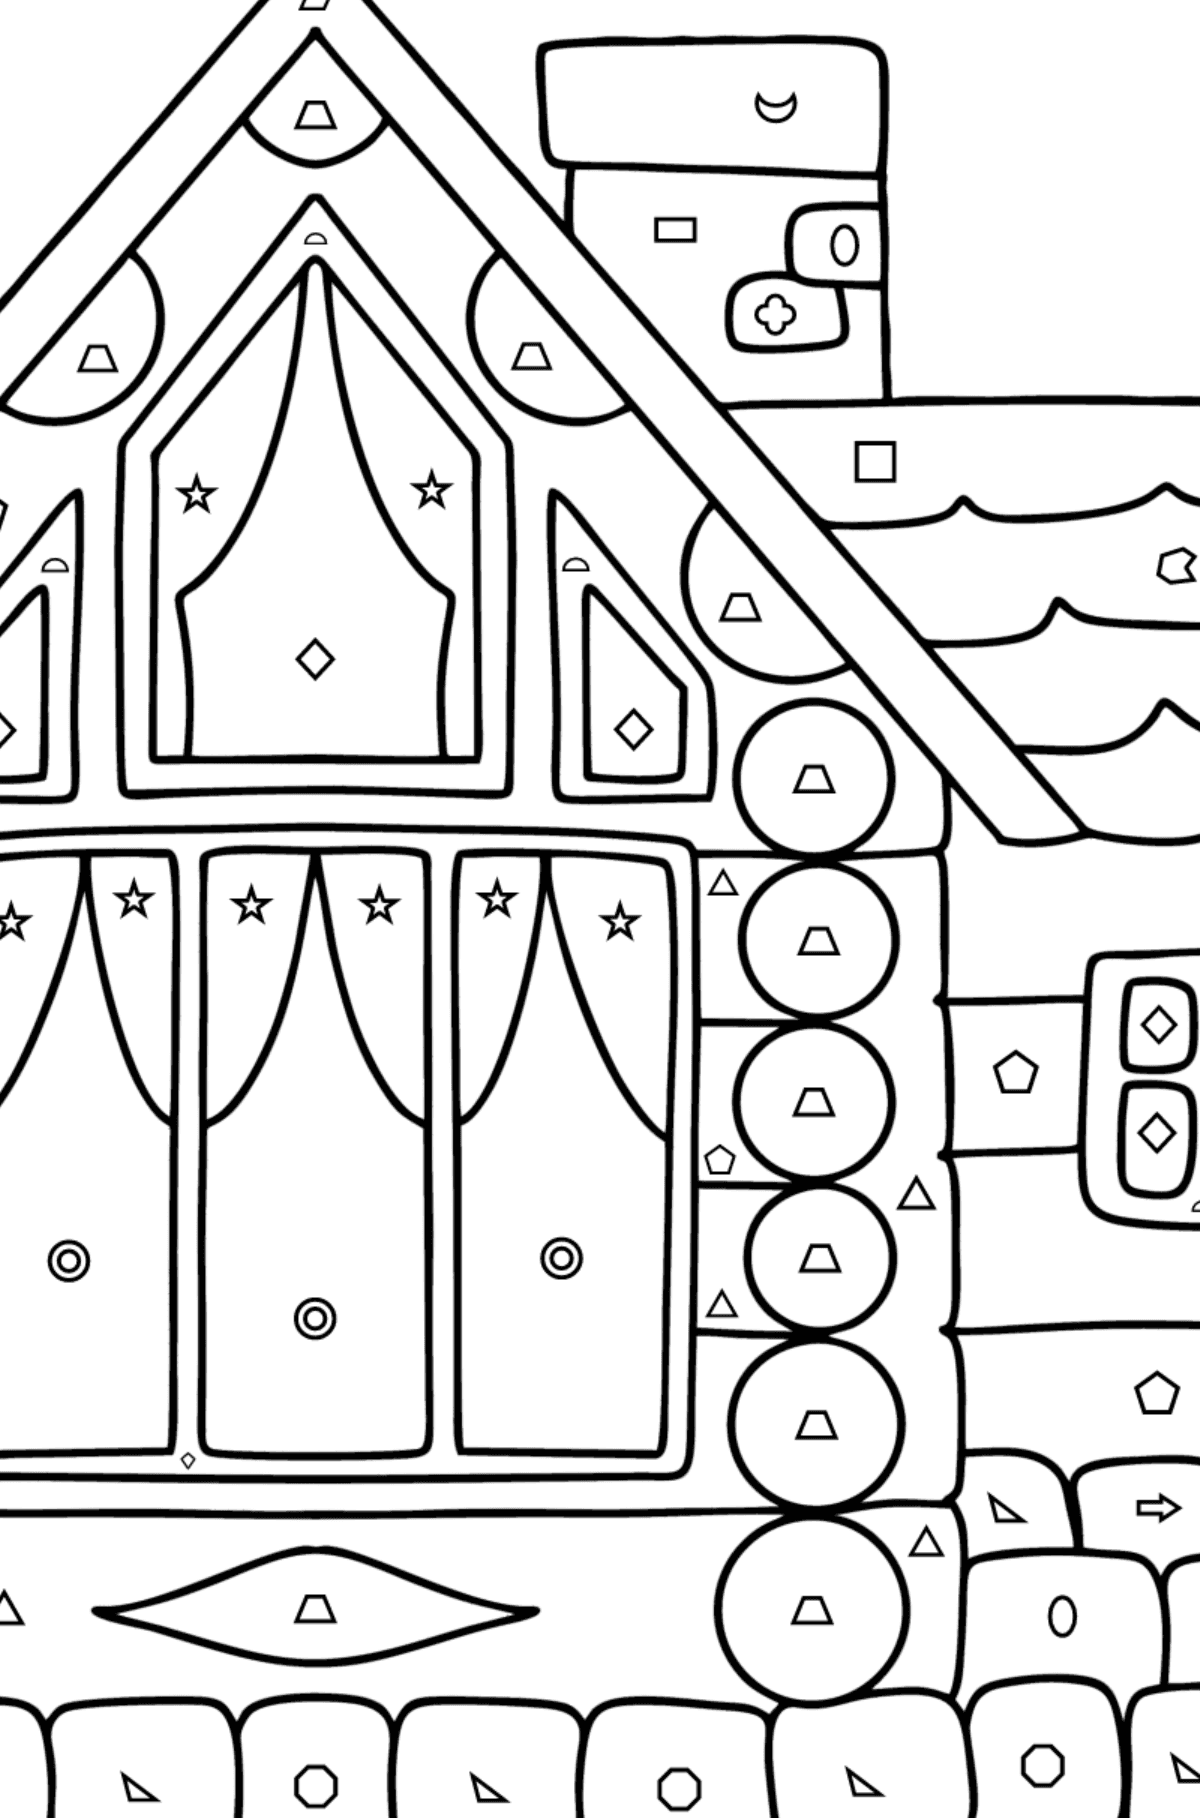 Log Cabin in Wood coloring page - Coloring by Geometric Shapes for Kids